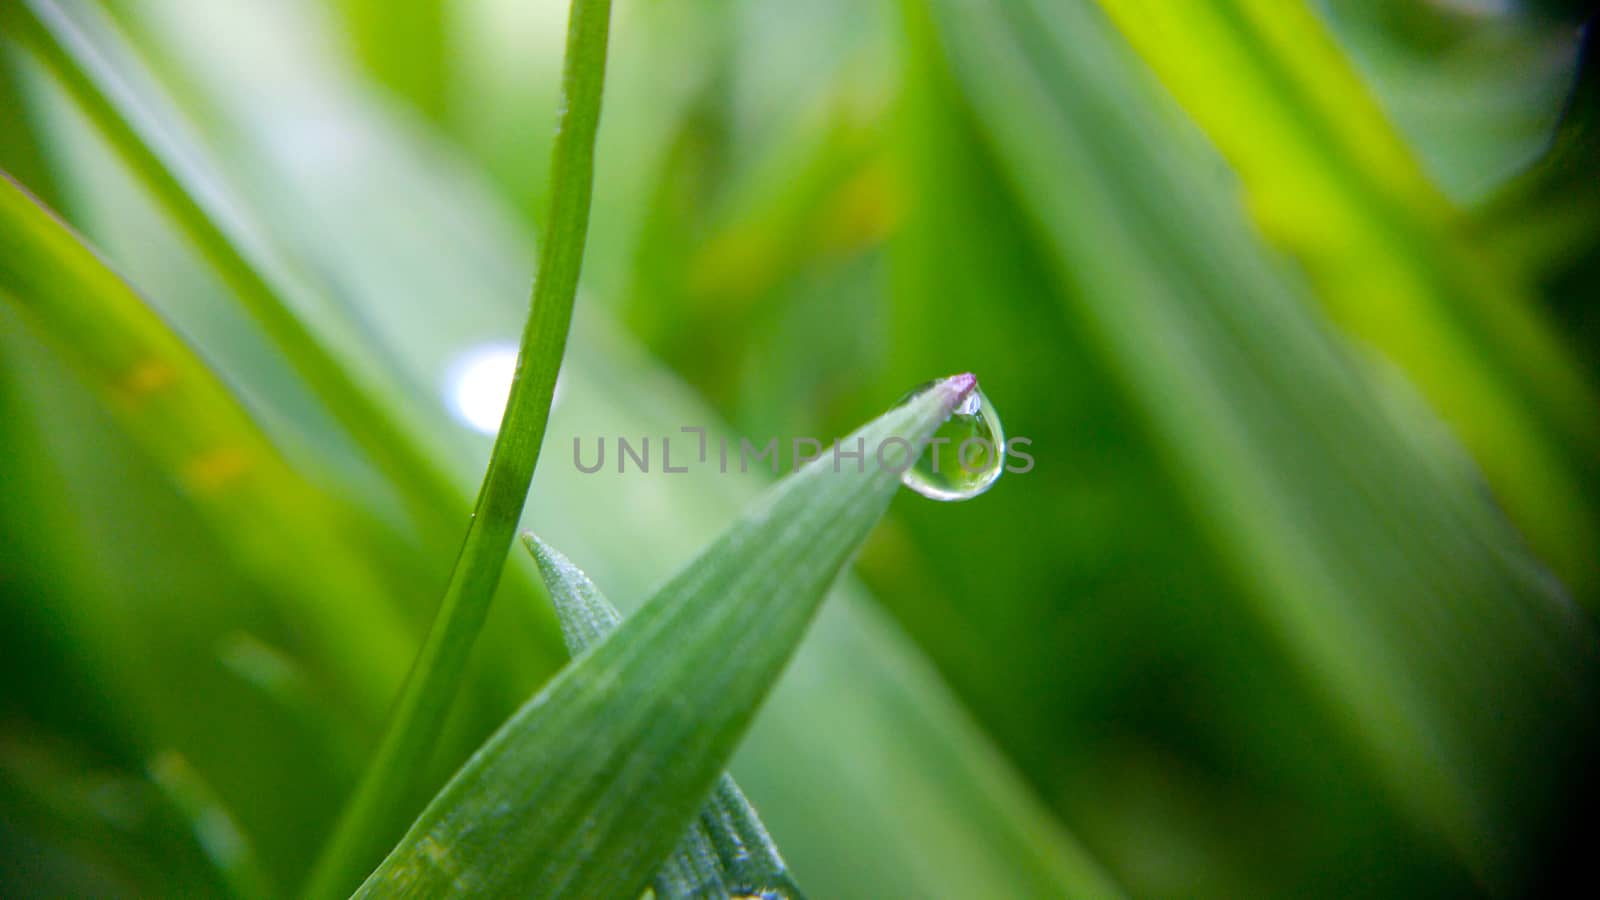 Alone morning drop on the green leaf, shooting close-up